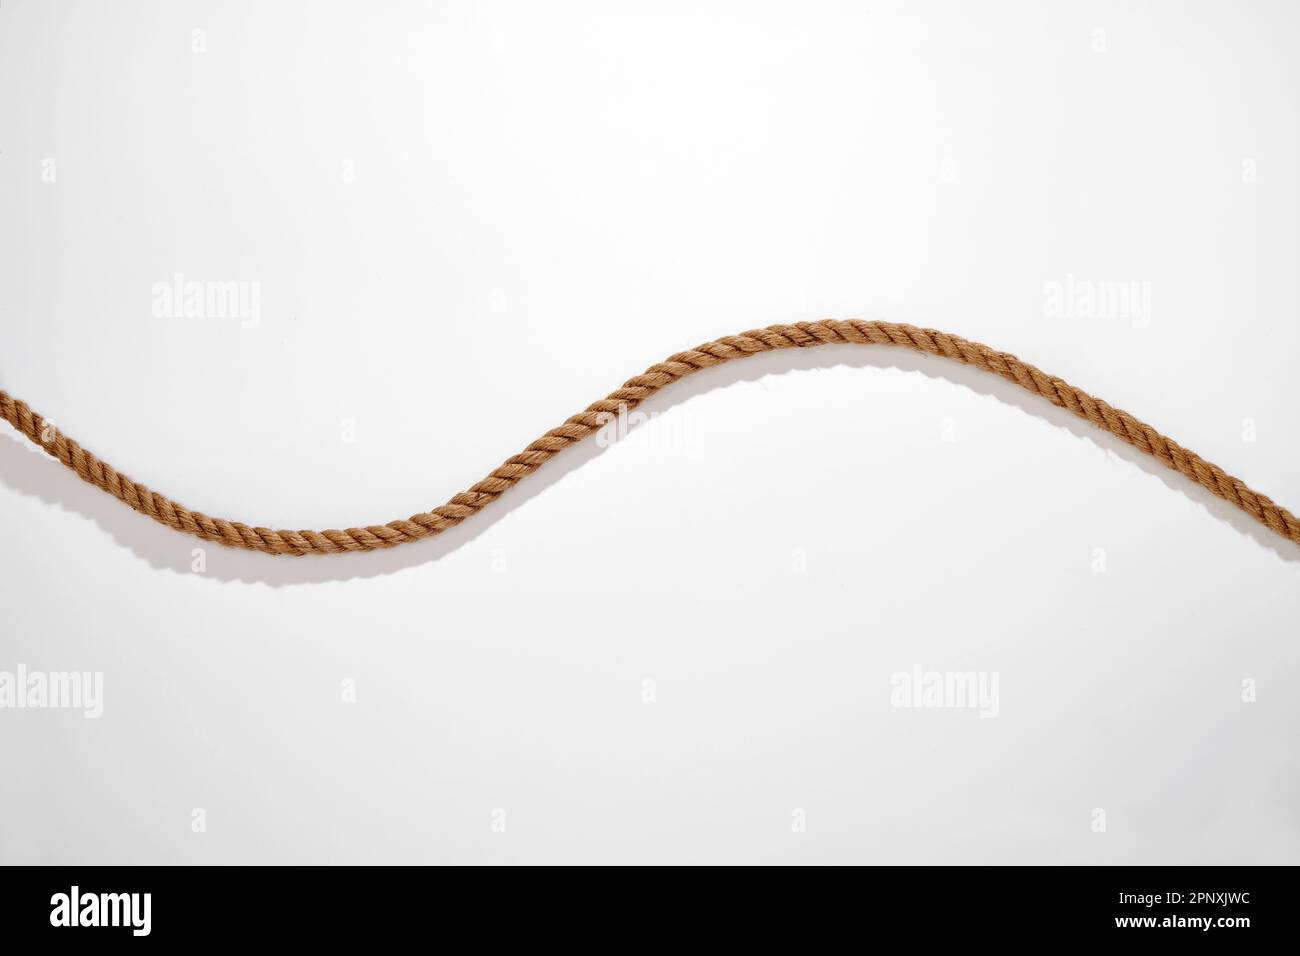 Top view of natural fiber wavy rope placed on white background with shadow Stock Photo